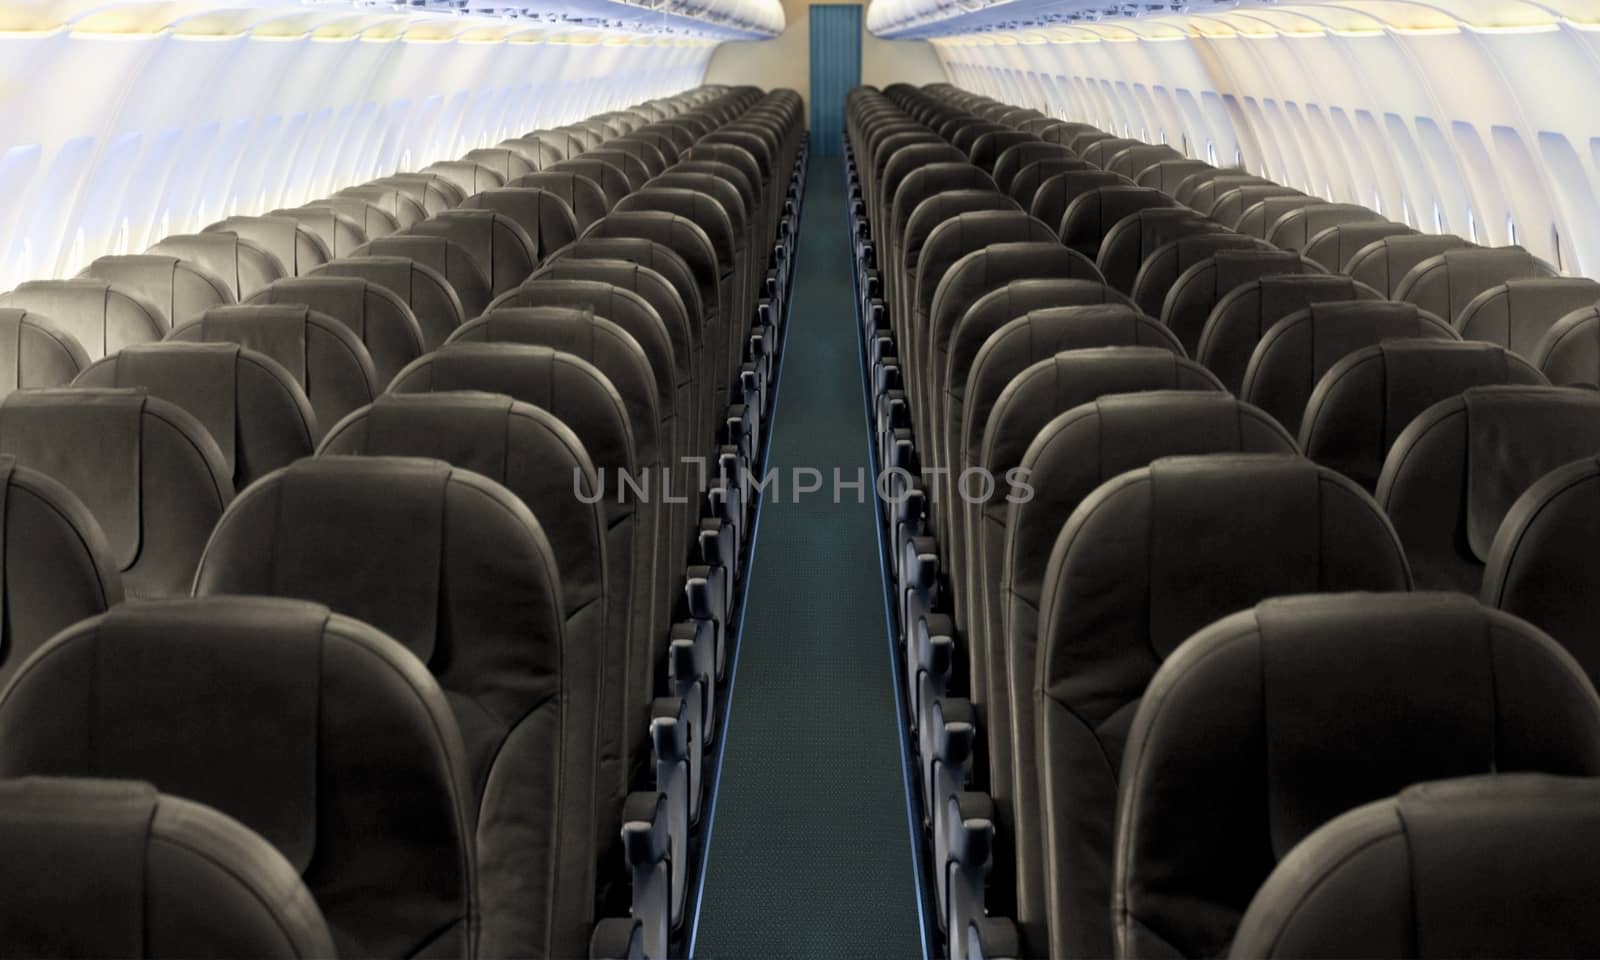 Airplane aisle with row of seats